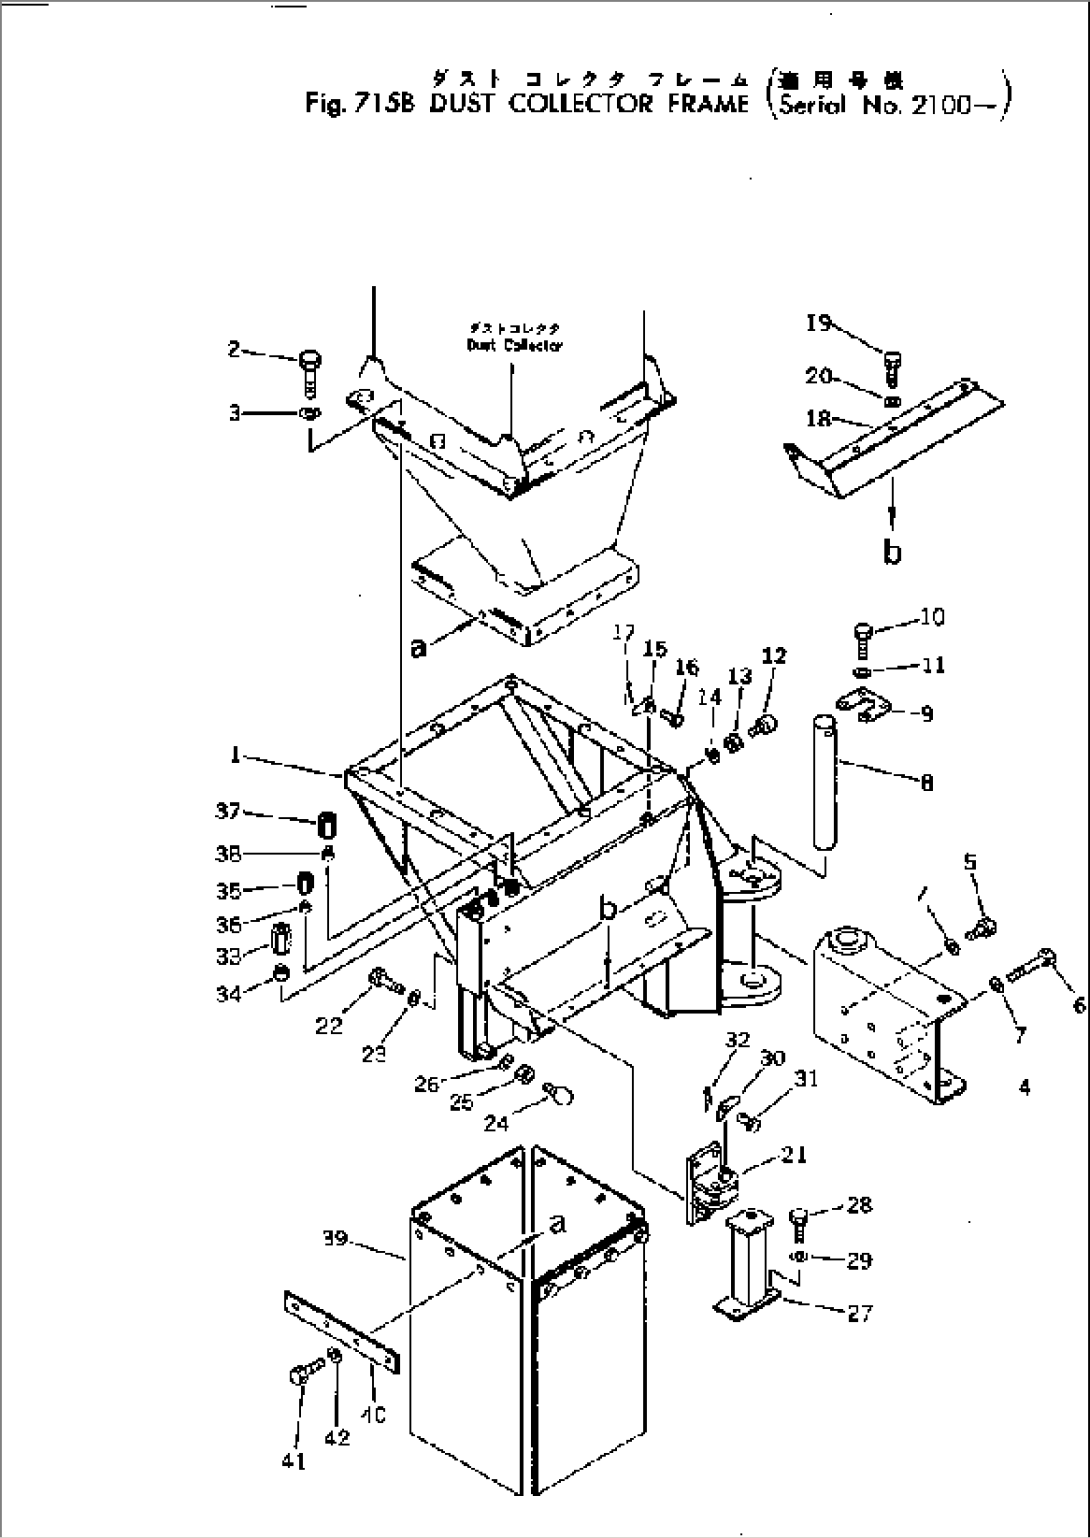 DUST COLLECTOR FRAME(#2100-)